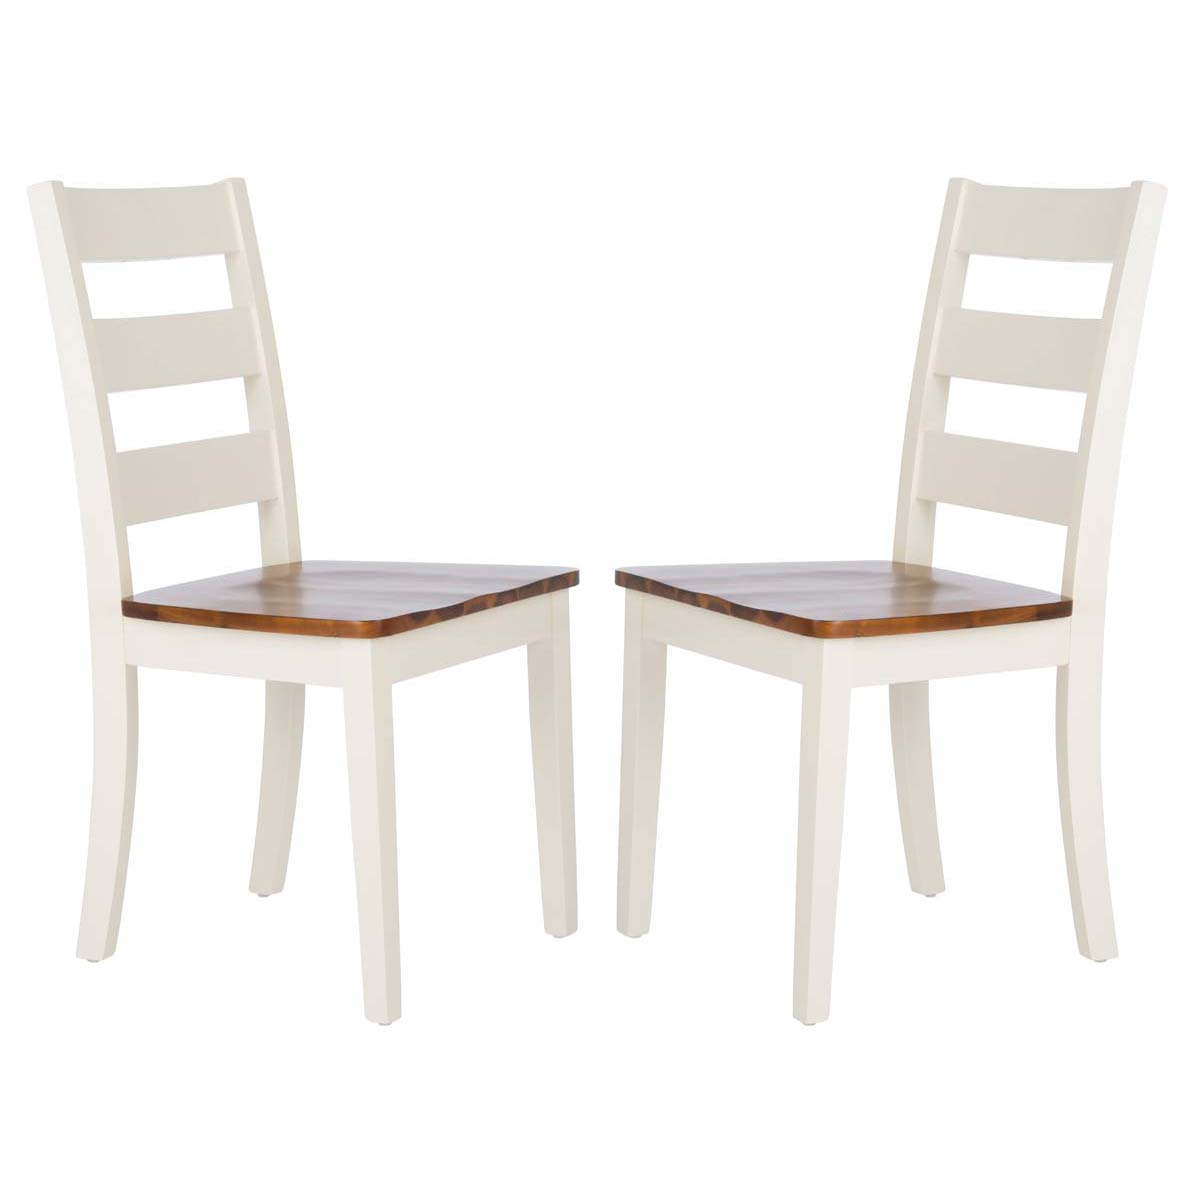 Safavieh Silio Ladder Back Dining Chair, DCH9213 - White/Natural (Set of 2)